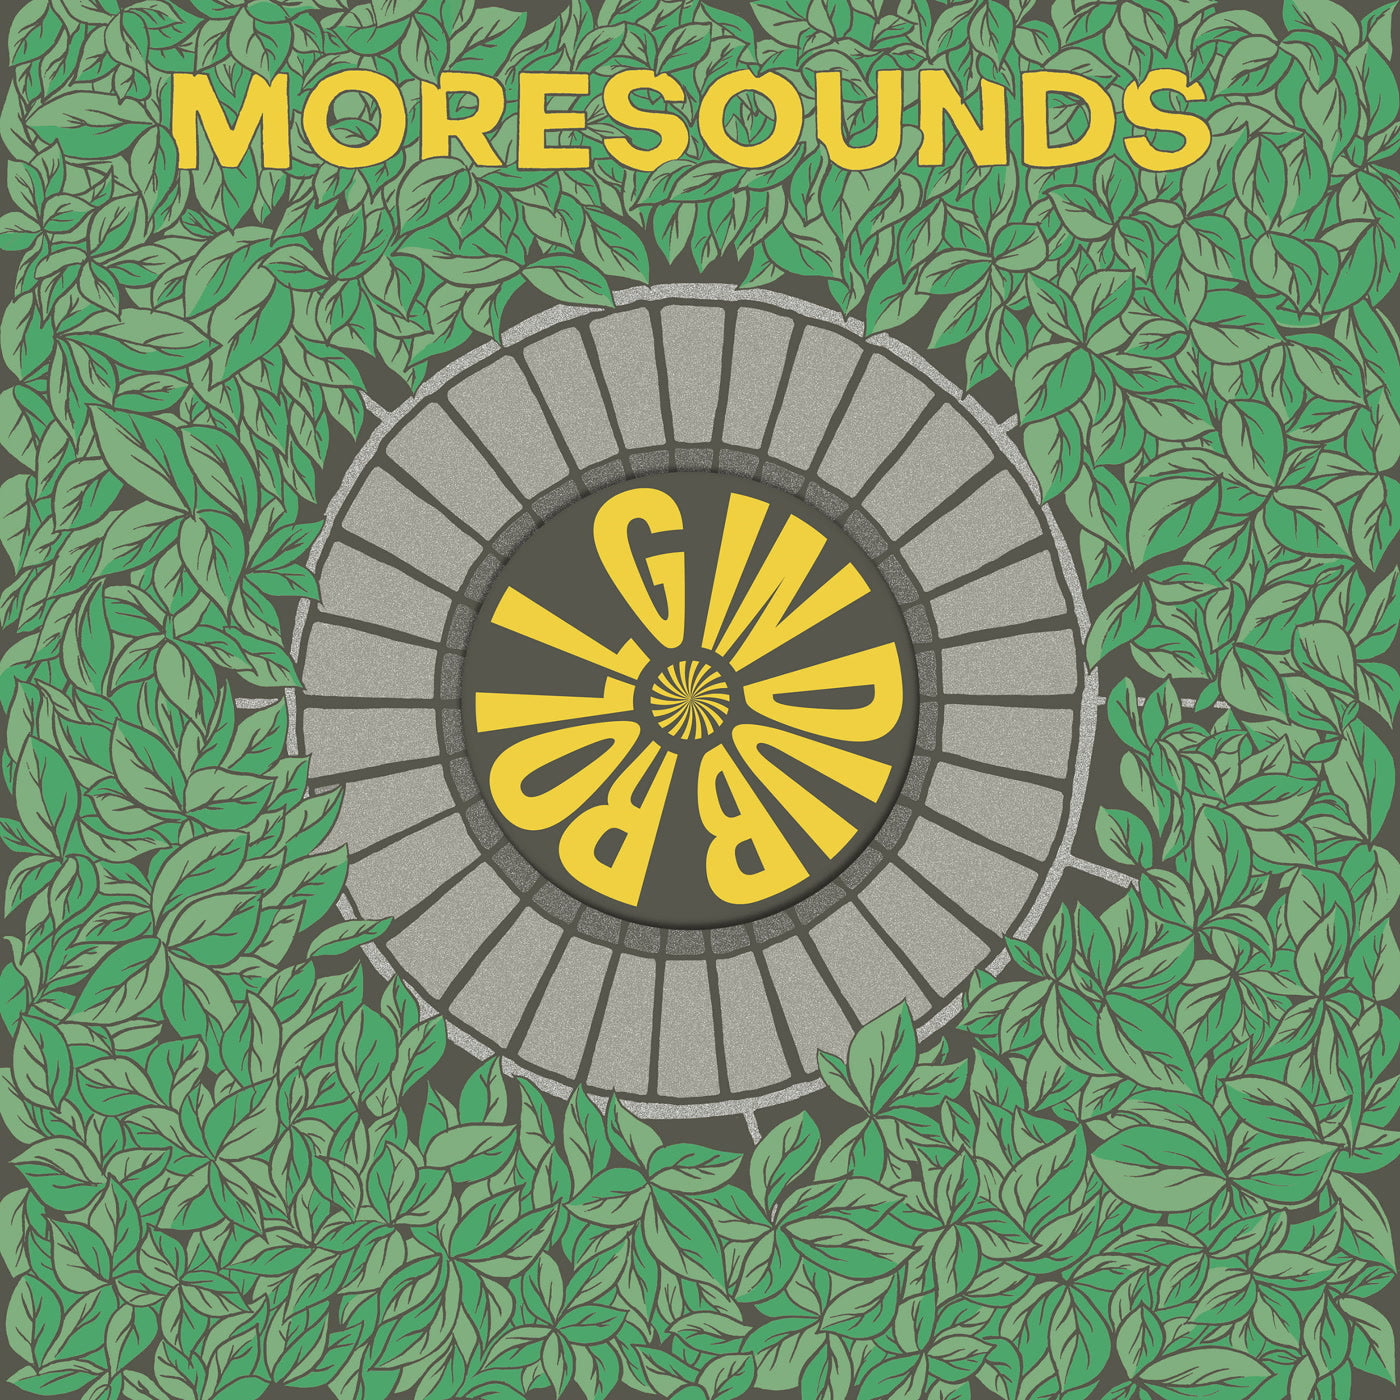 MORESOUNDS 'ROLL G IN DUB' 12"